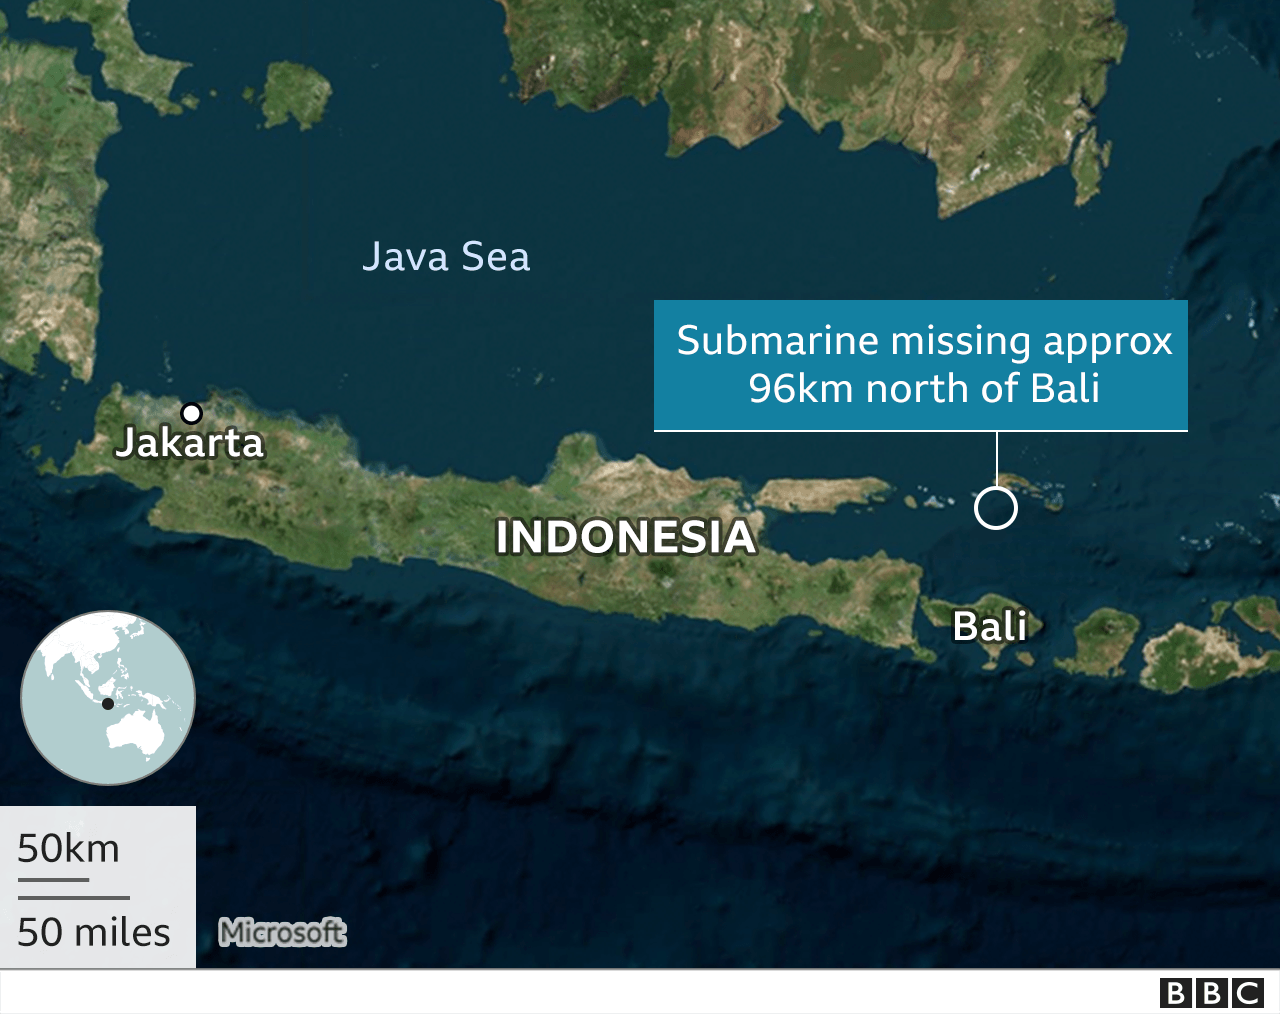 Image shows a map of Indonesia and the location where the submarine went missing